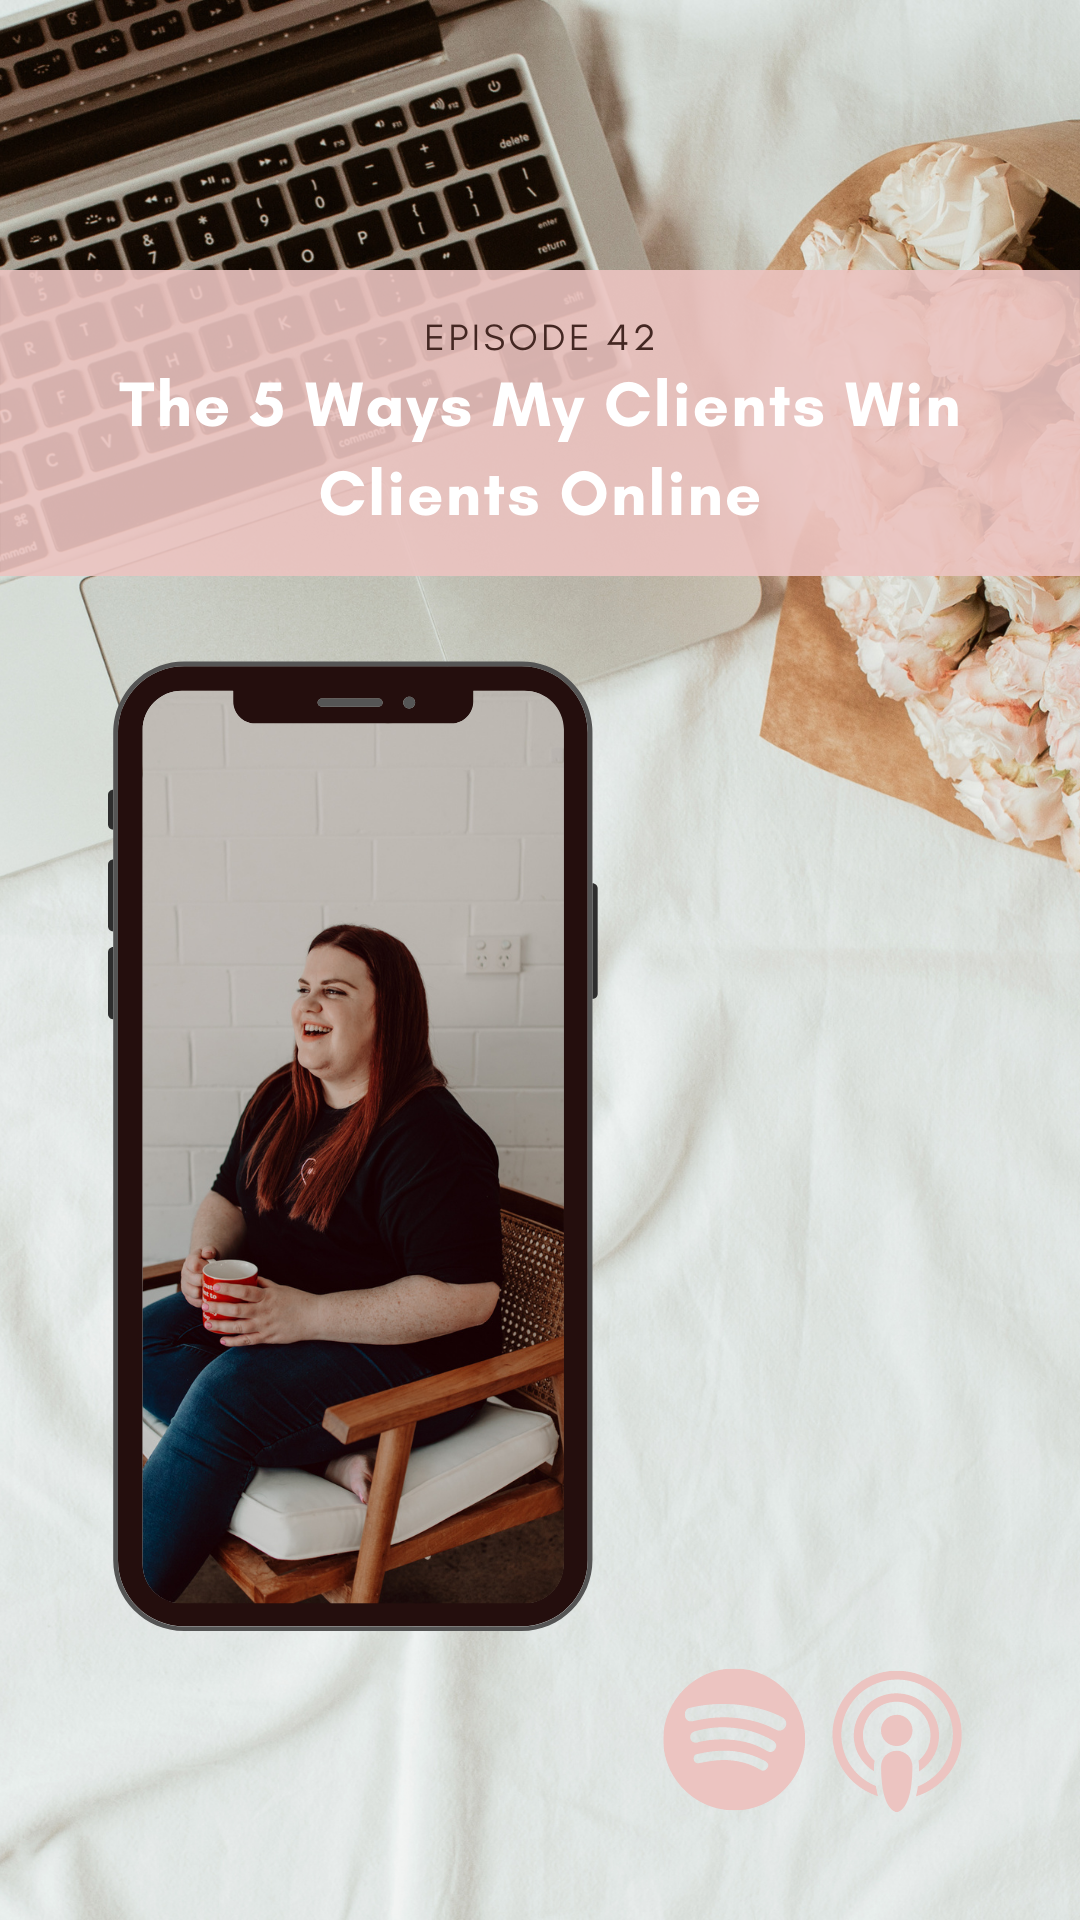 The 5 Ways My Clients Win Clients Online